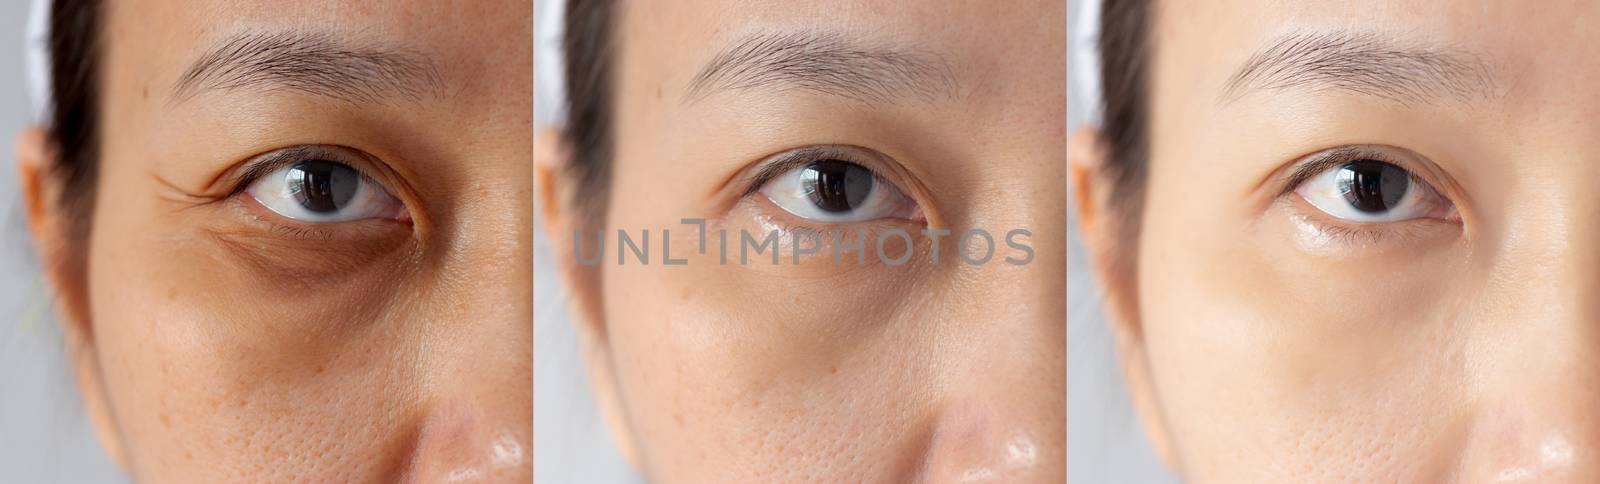 three pictures compared effect Before and After treatment. under eyes with problems of dark circles ,puffiness and wrinkles periorbital before and after treatment to solve skin problem for better skin